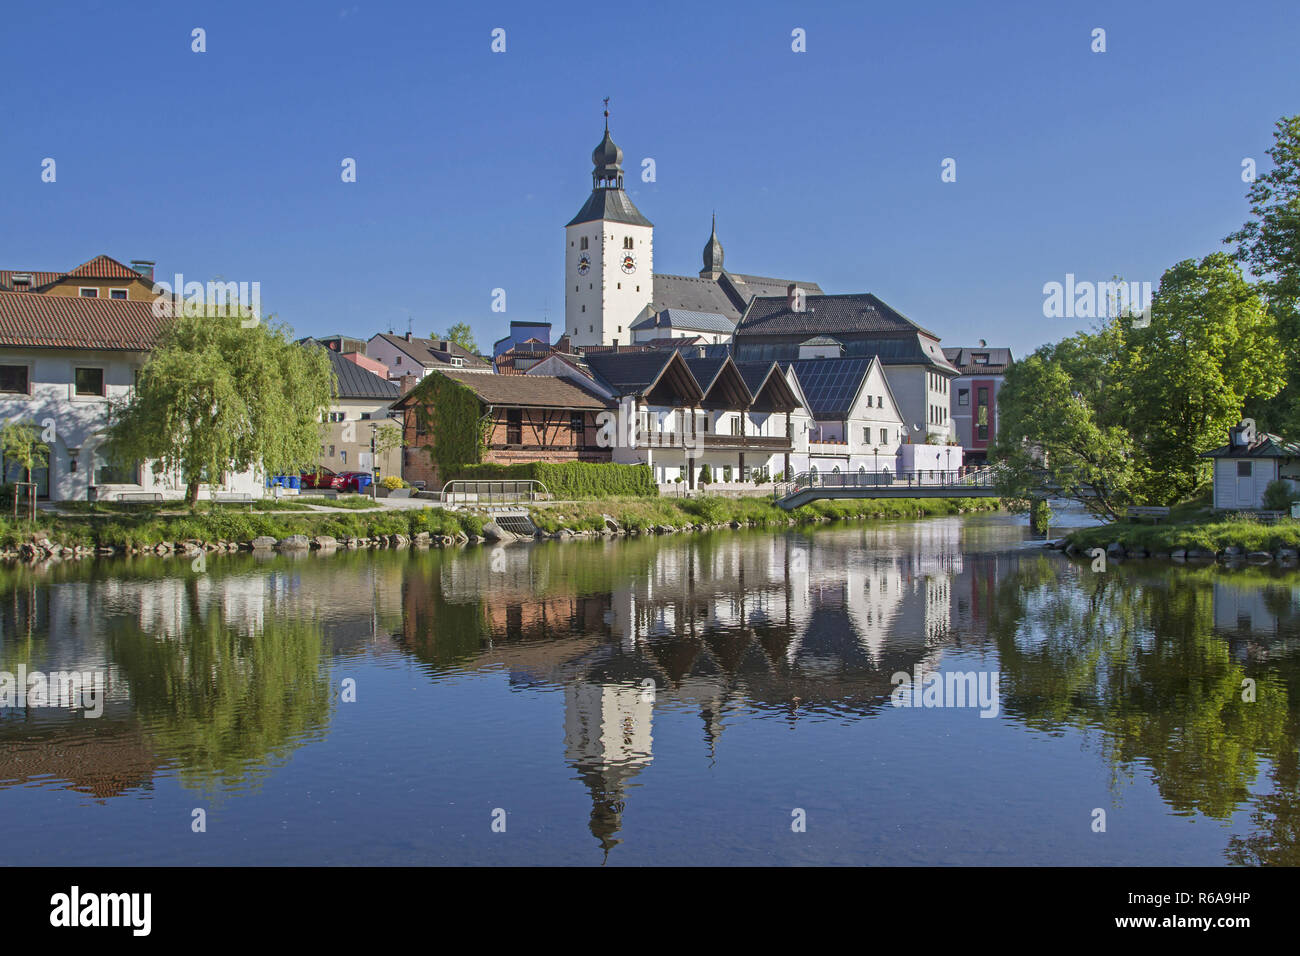 The County Town Of Regen Is Idyllically Located On The Banks Of The River Of The Same Name In The Administrative District Of Lower Bavaria Stock Photo